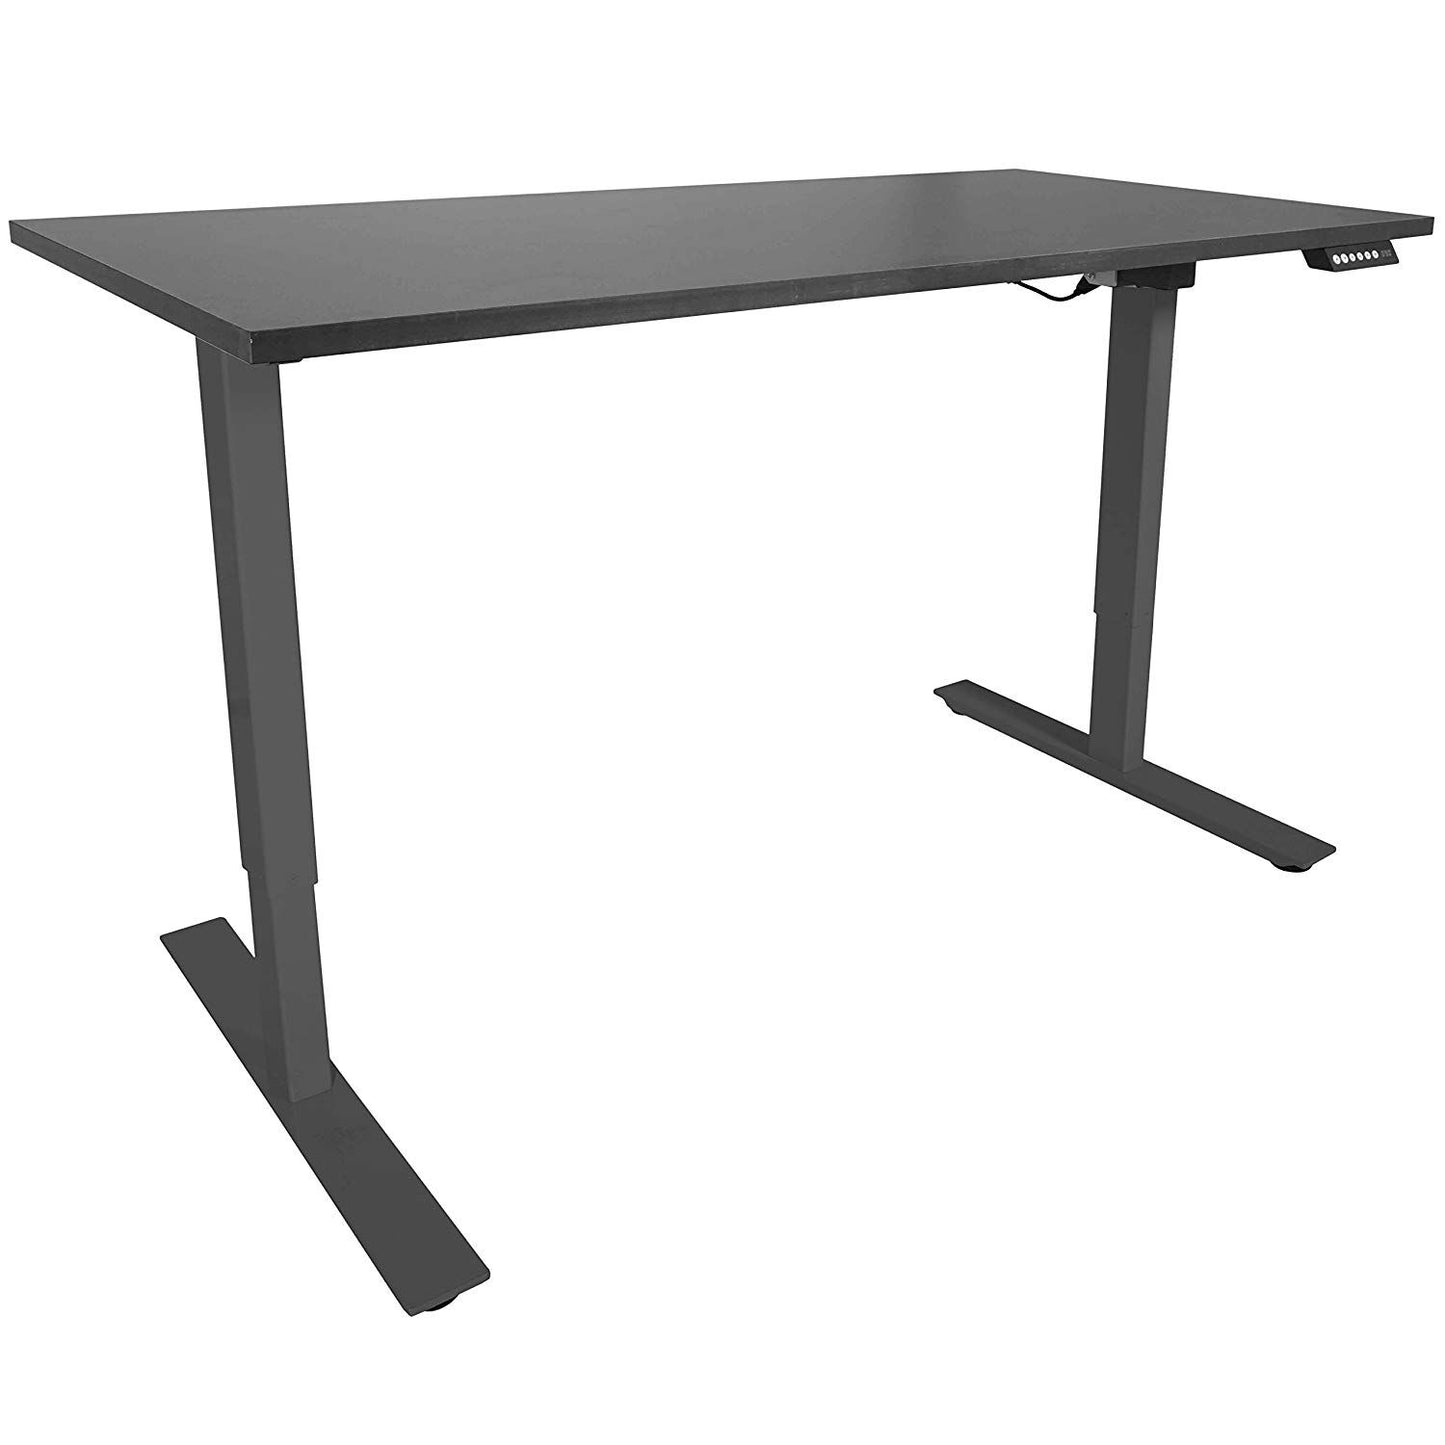 A2 Single Motor Sit To Stand Desk w/ Black 30" x 48" Top - view 1